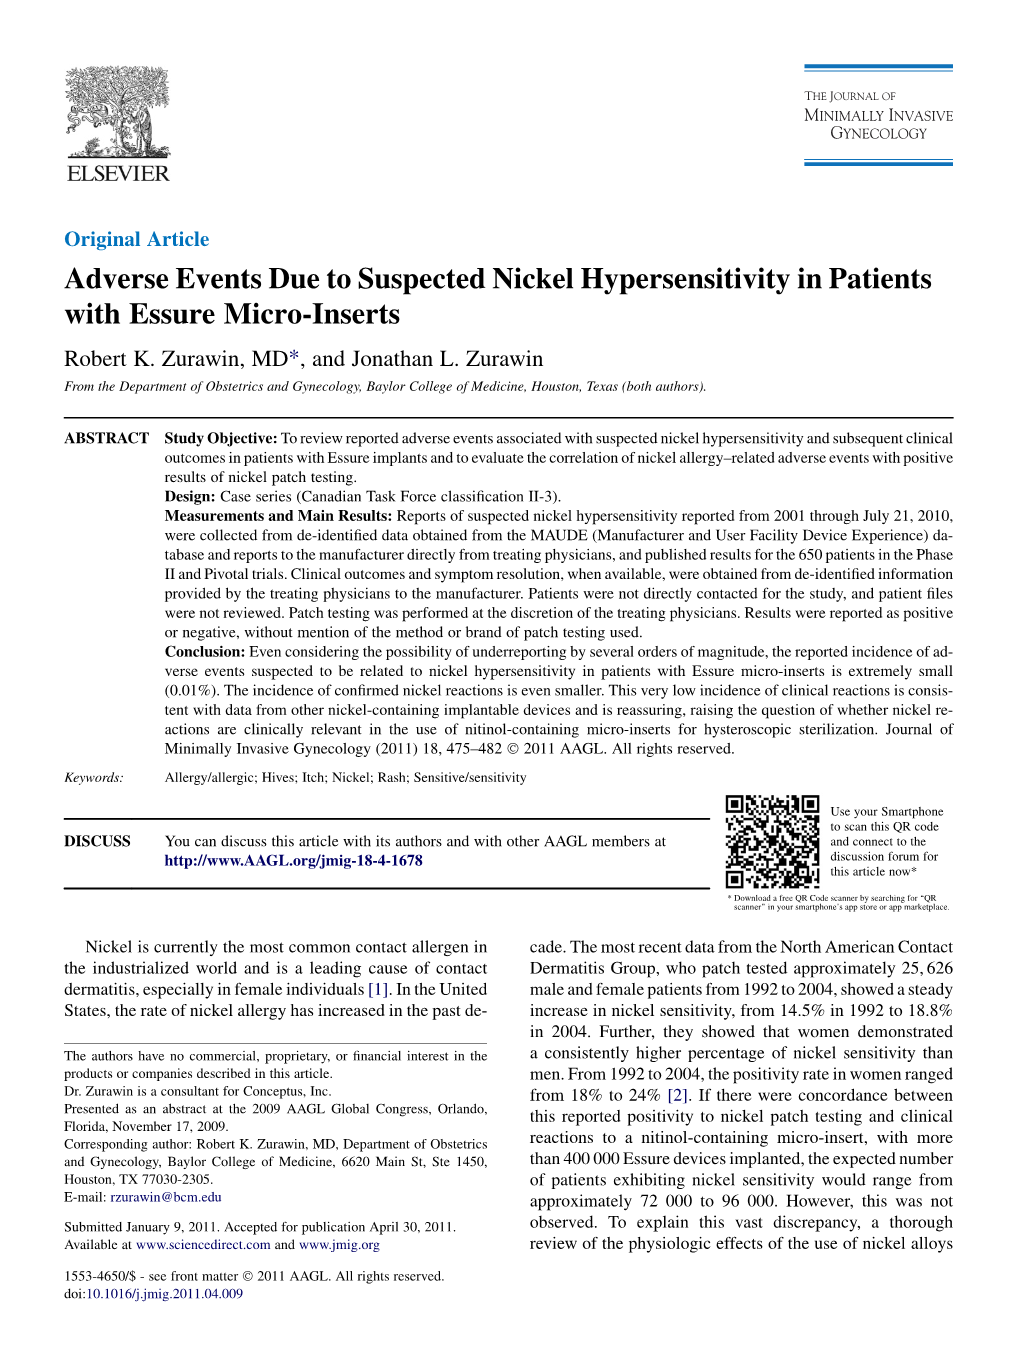 Adverse Events Due to Suspected Nickel Hypersensitivity in Patients with Essure Micro-Inserts Robert K